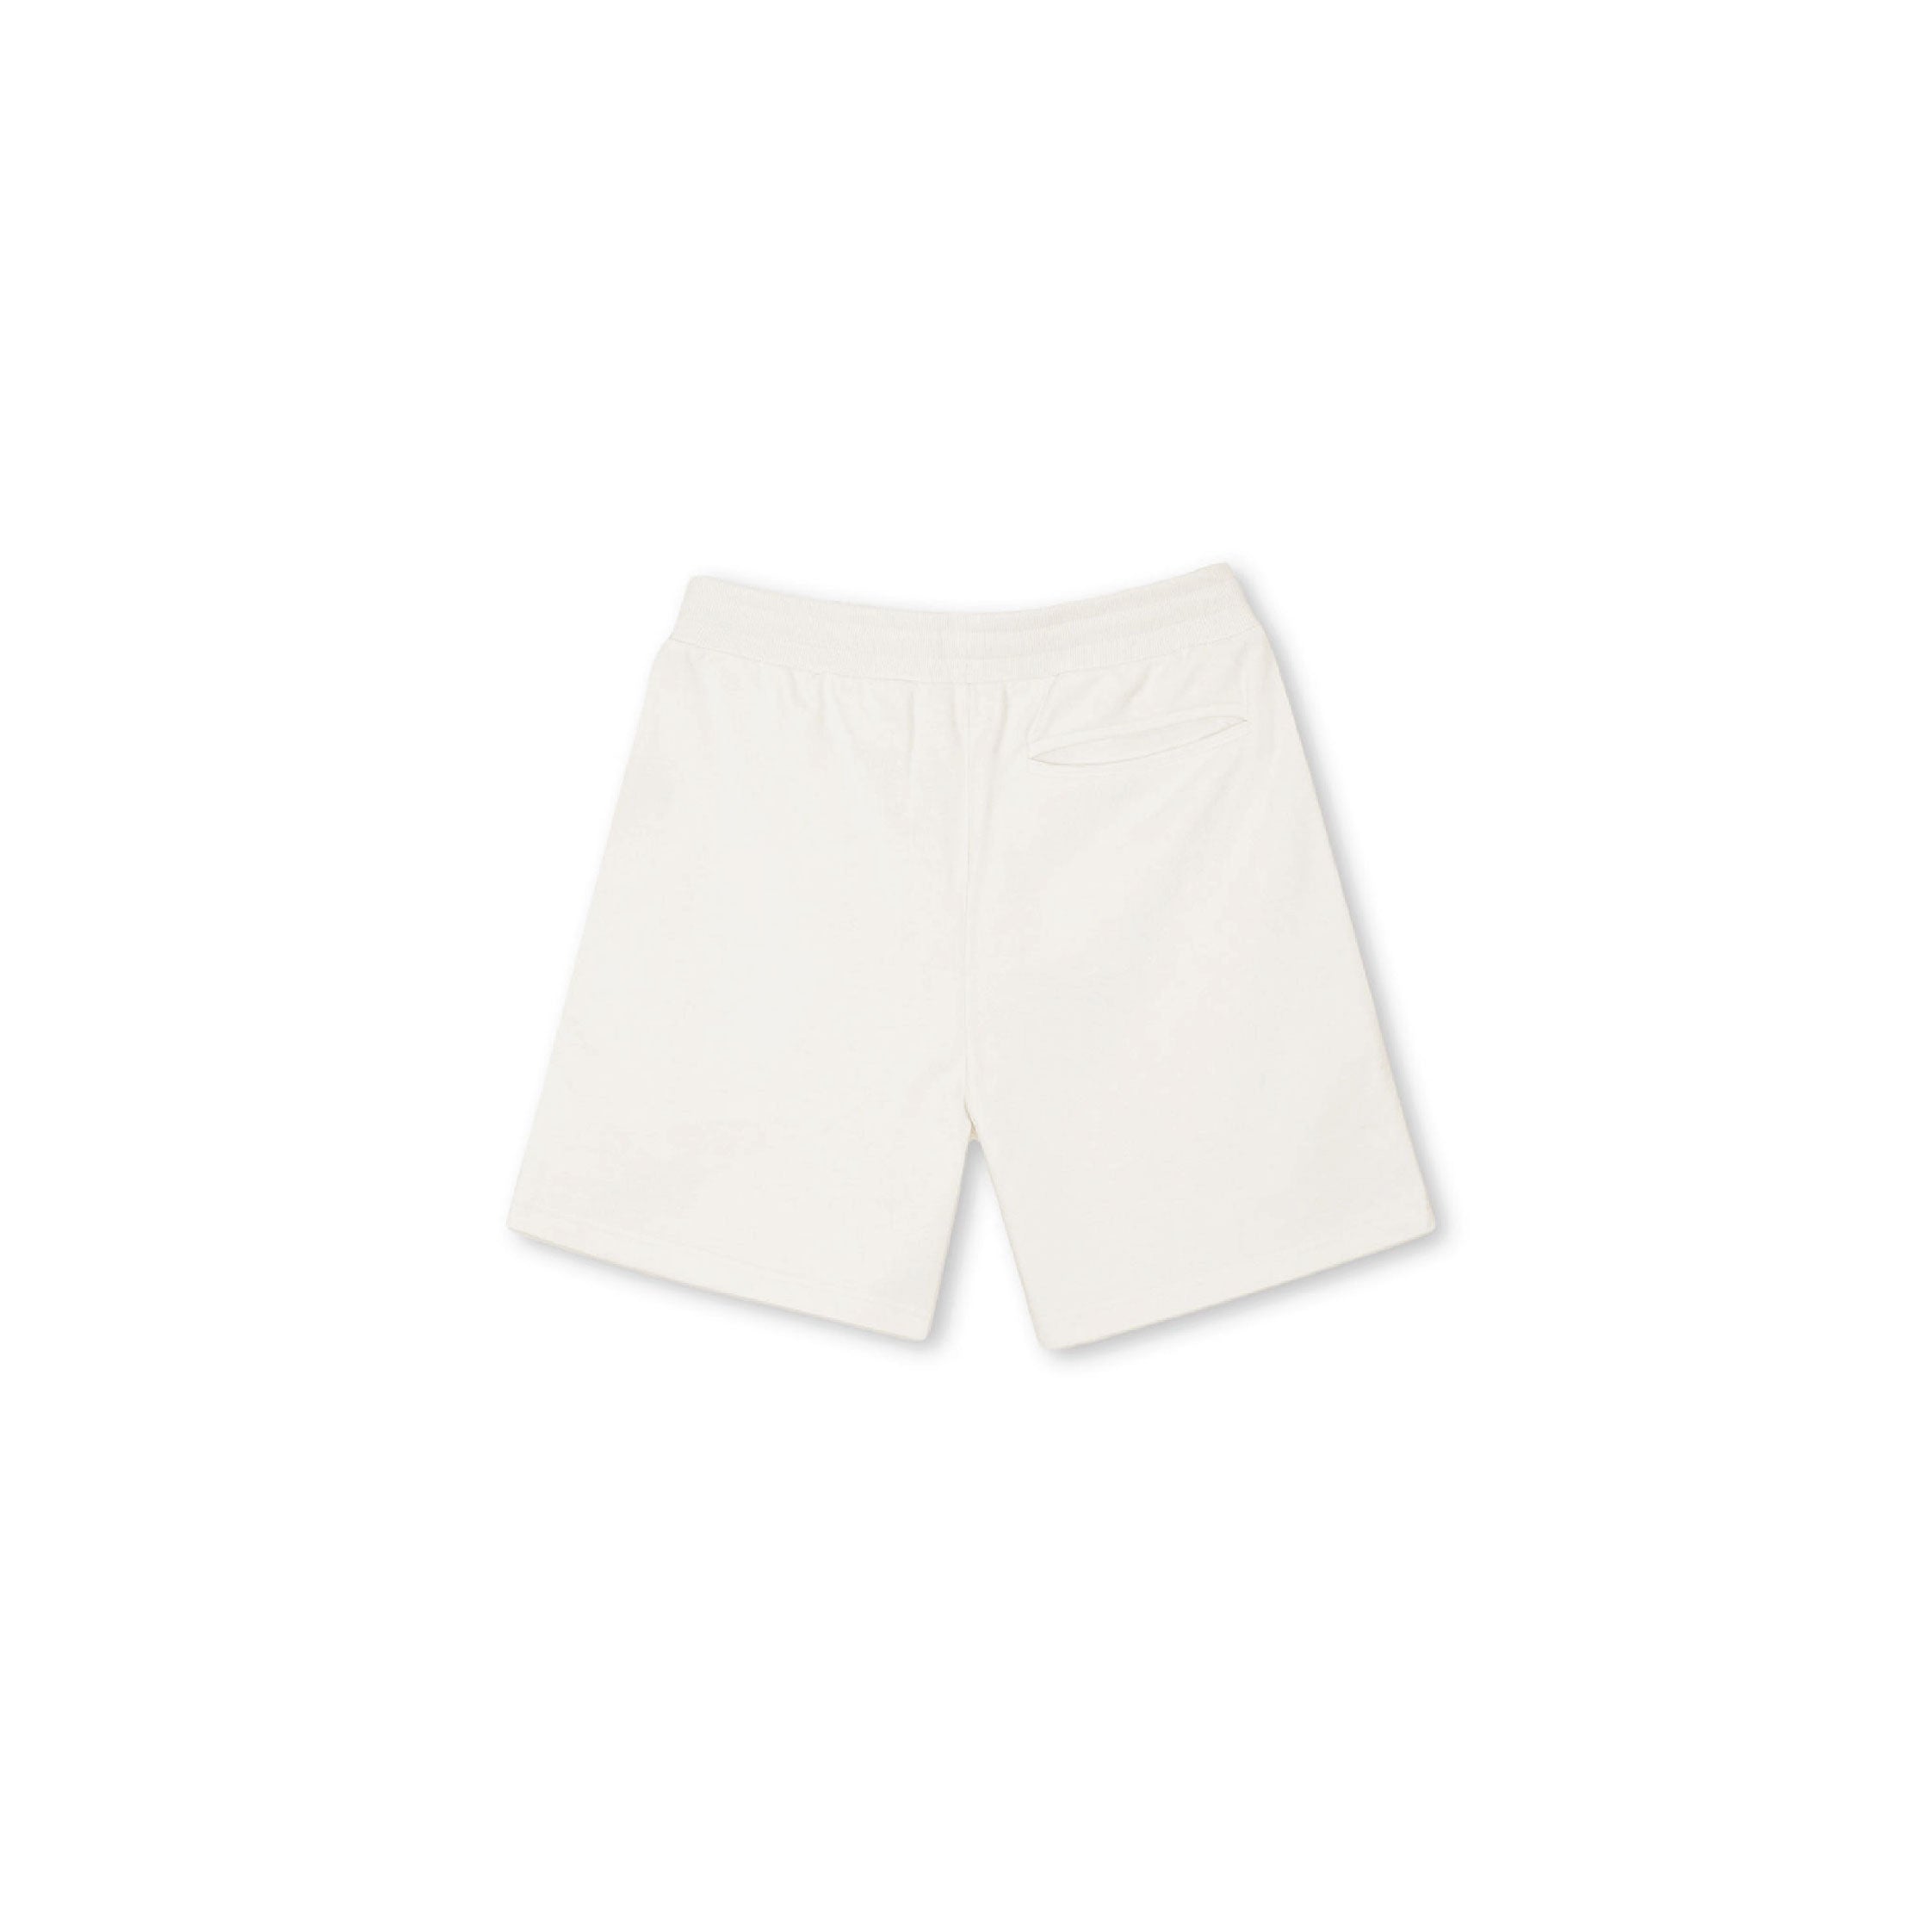 ESTATE OF MIND FRENCH TERRY SHORTS - VINTAGE WHITE